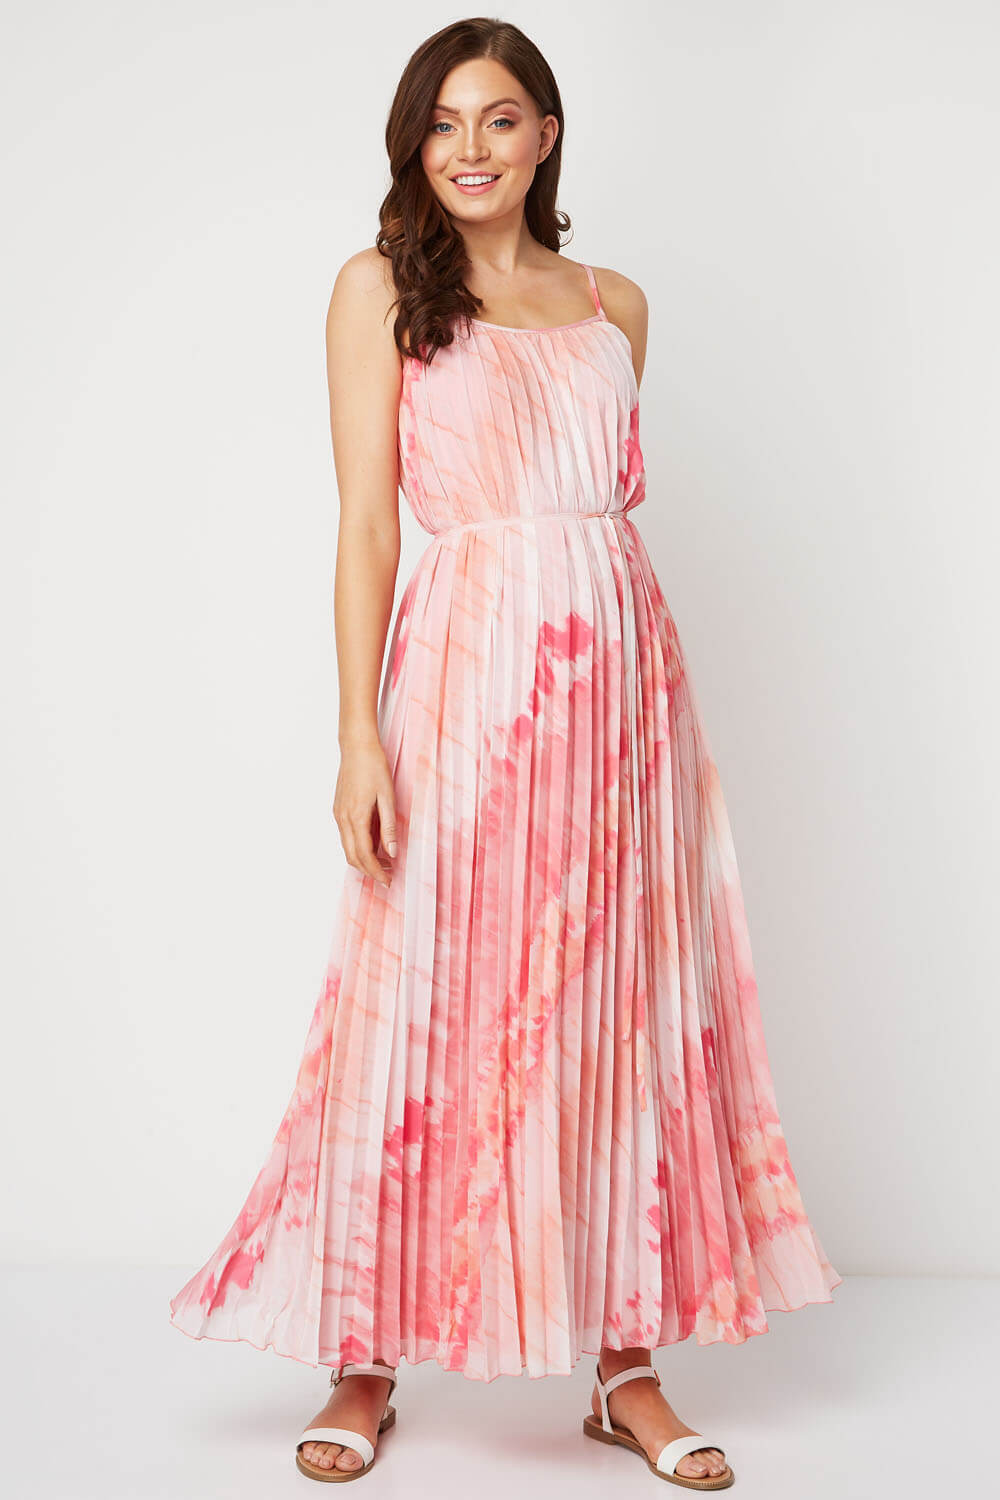 PINK Pleated Tie Dye Effect Maxi Dress, Image 2 of 4